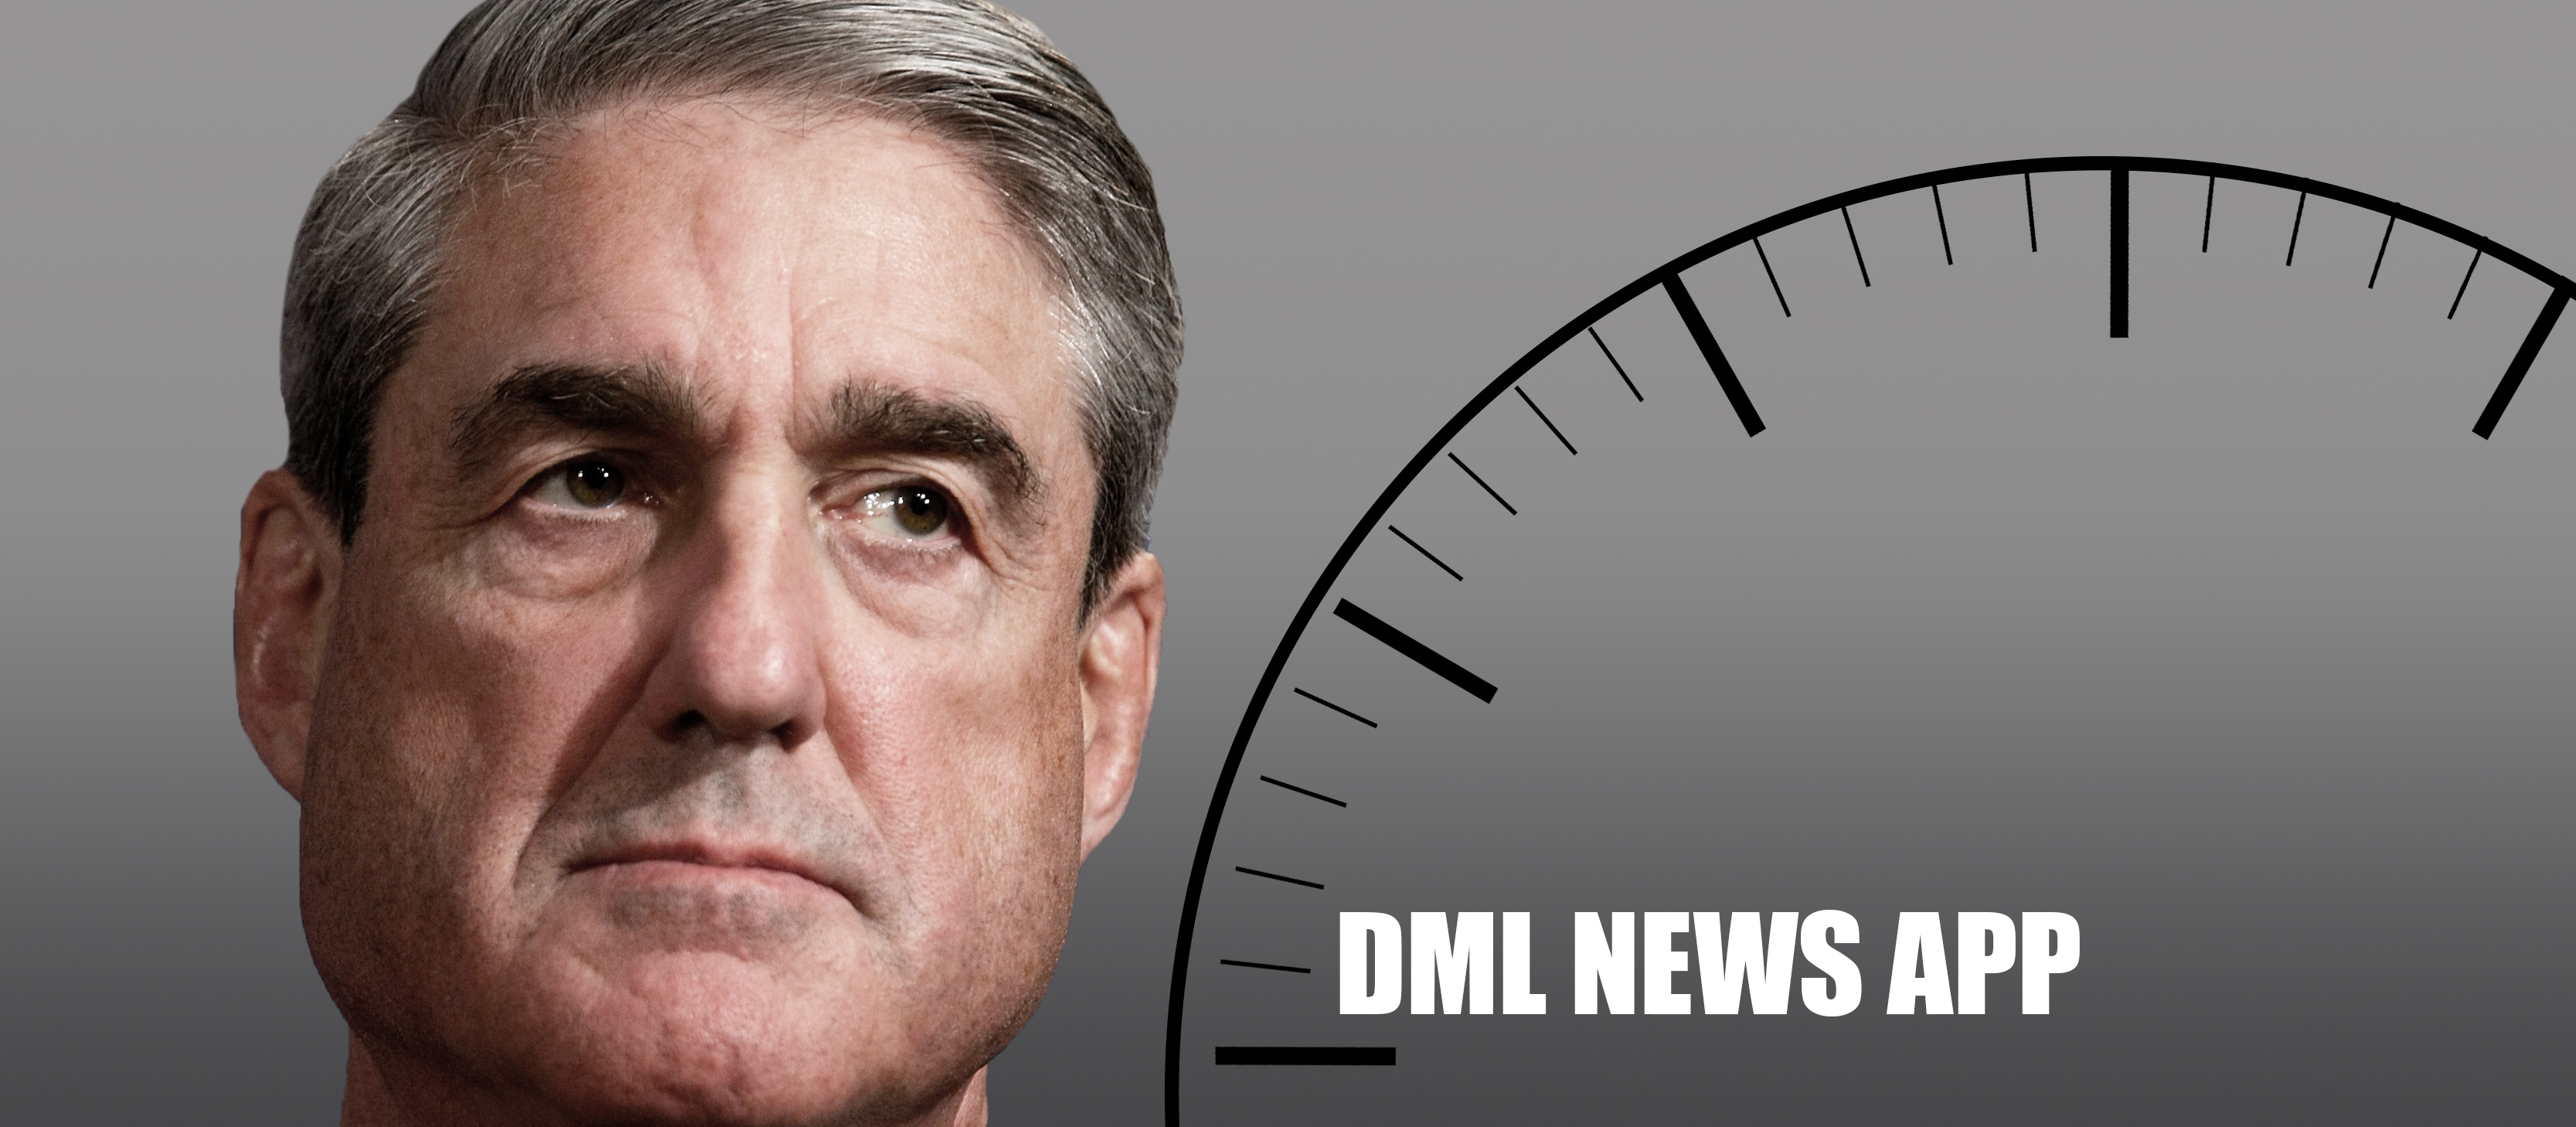 REPORT: Alleged whistleblower’s name discovered in key passage of Mueller report